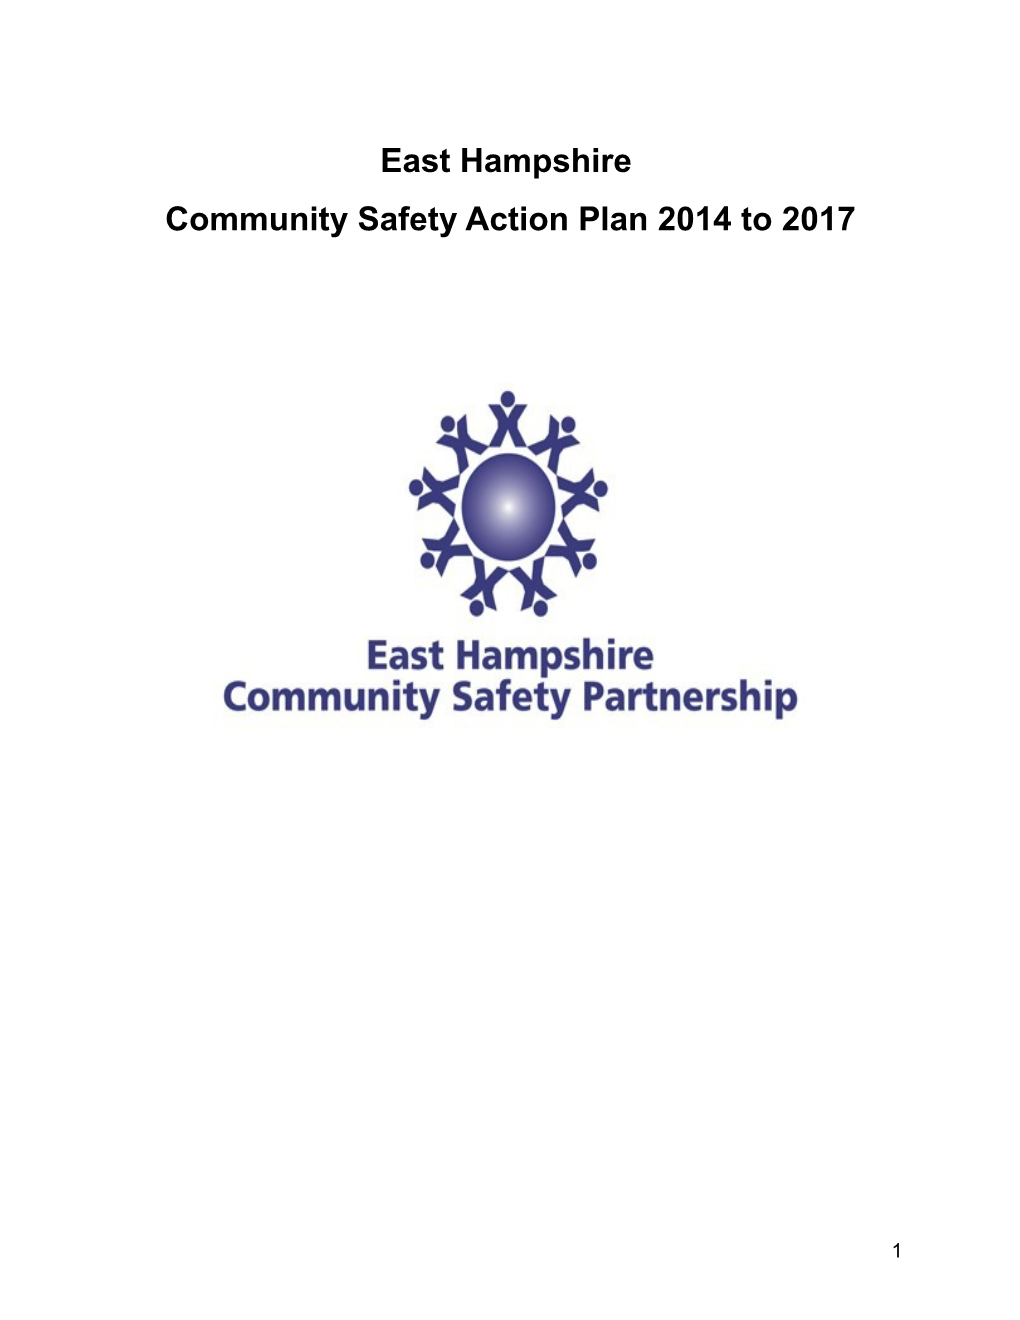 Community Safety Action Plan 2014 to 2017